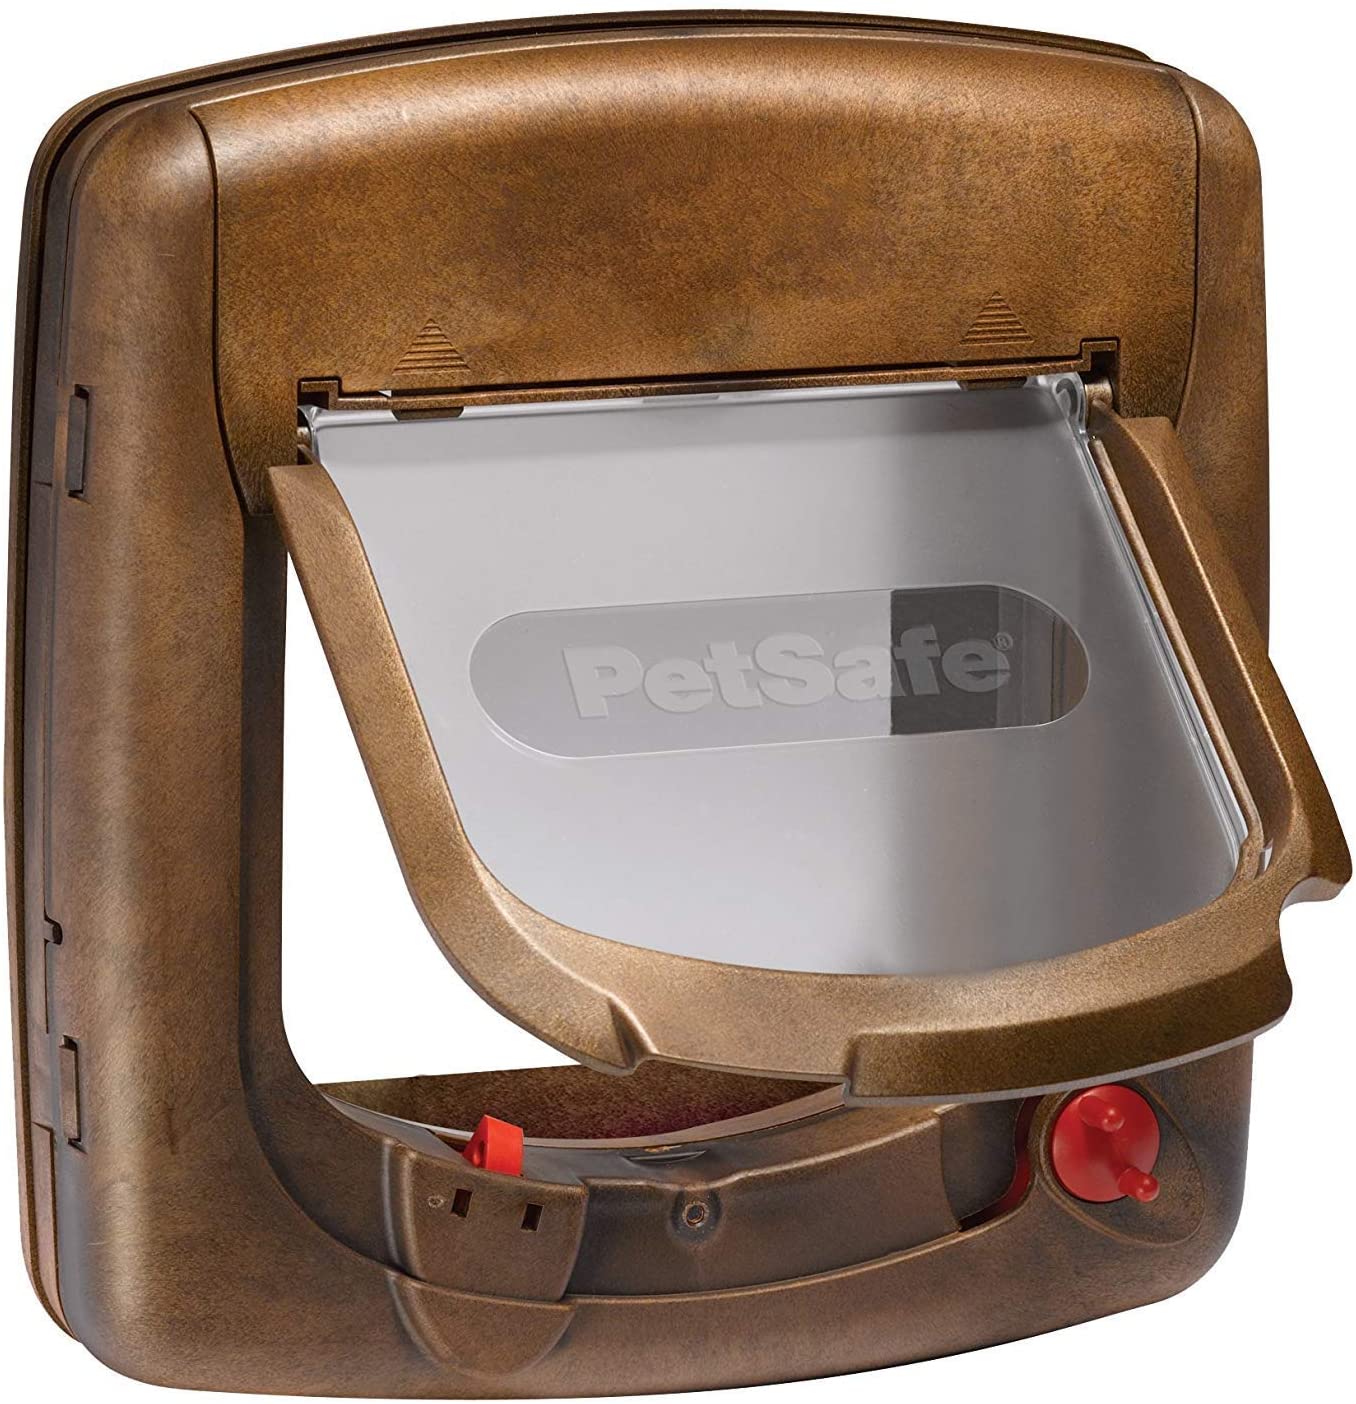  PetSafe - Staywell Deluxe - Gatera magnética. 